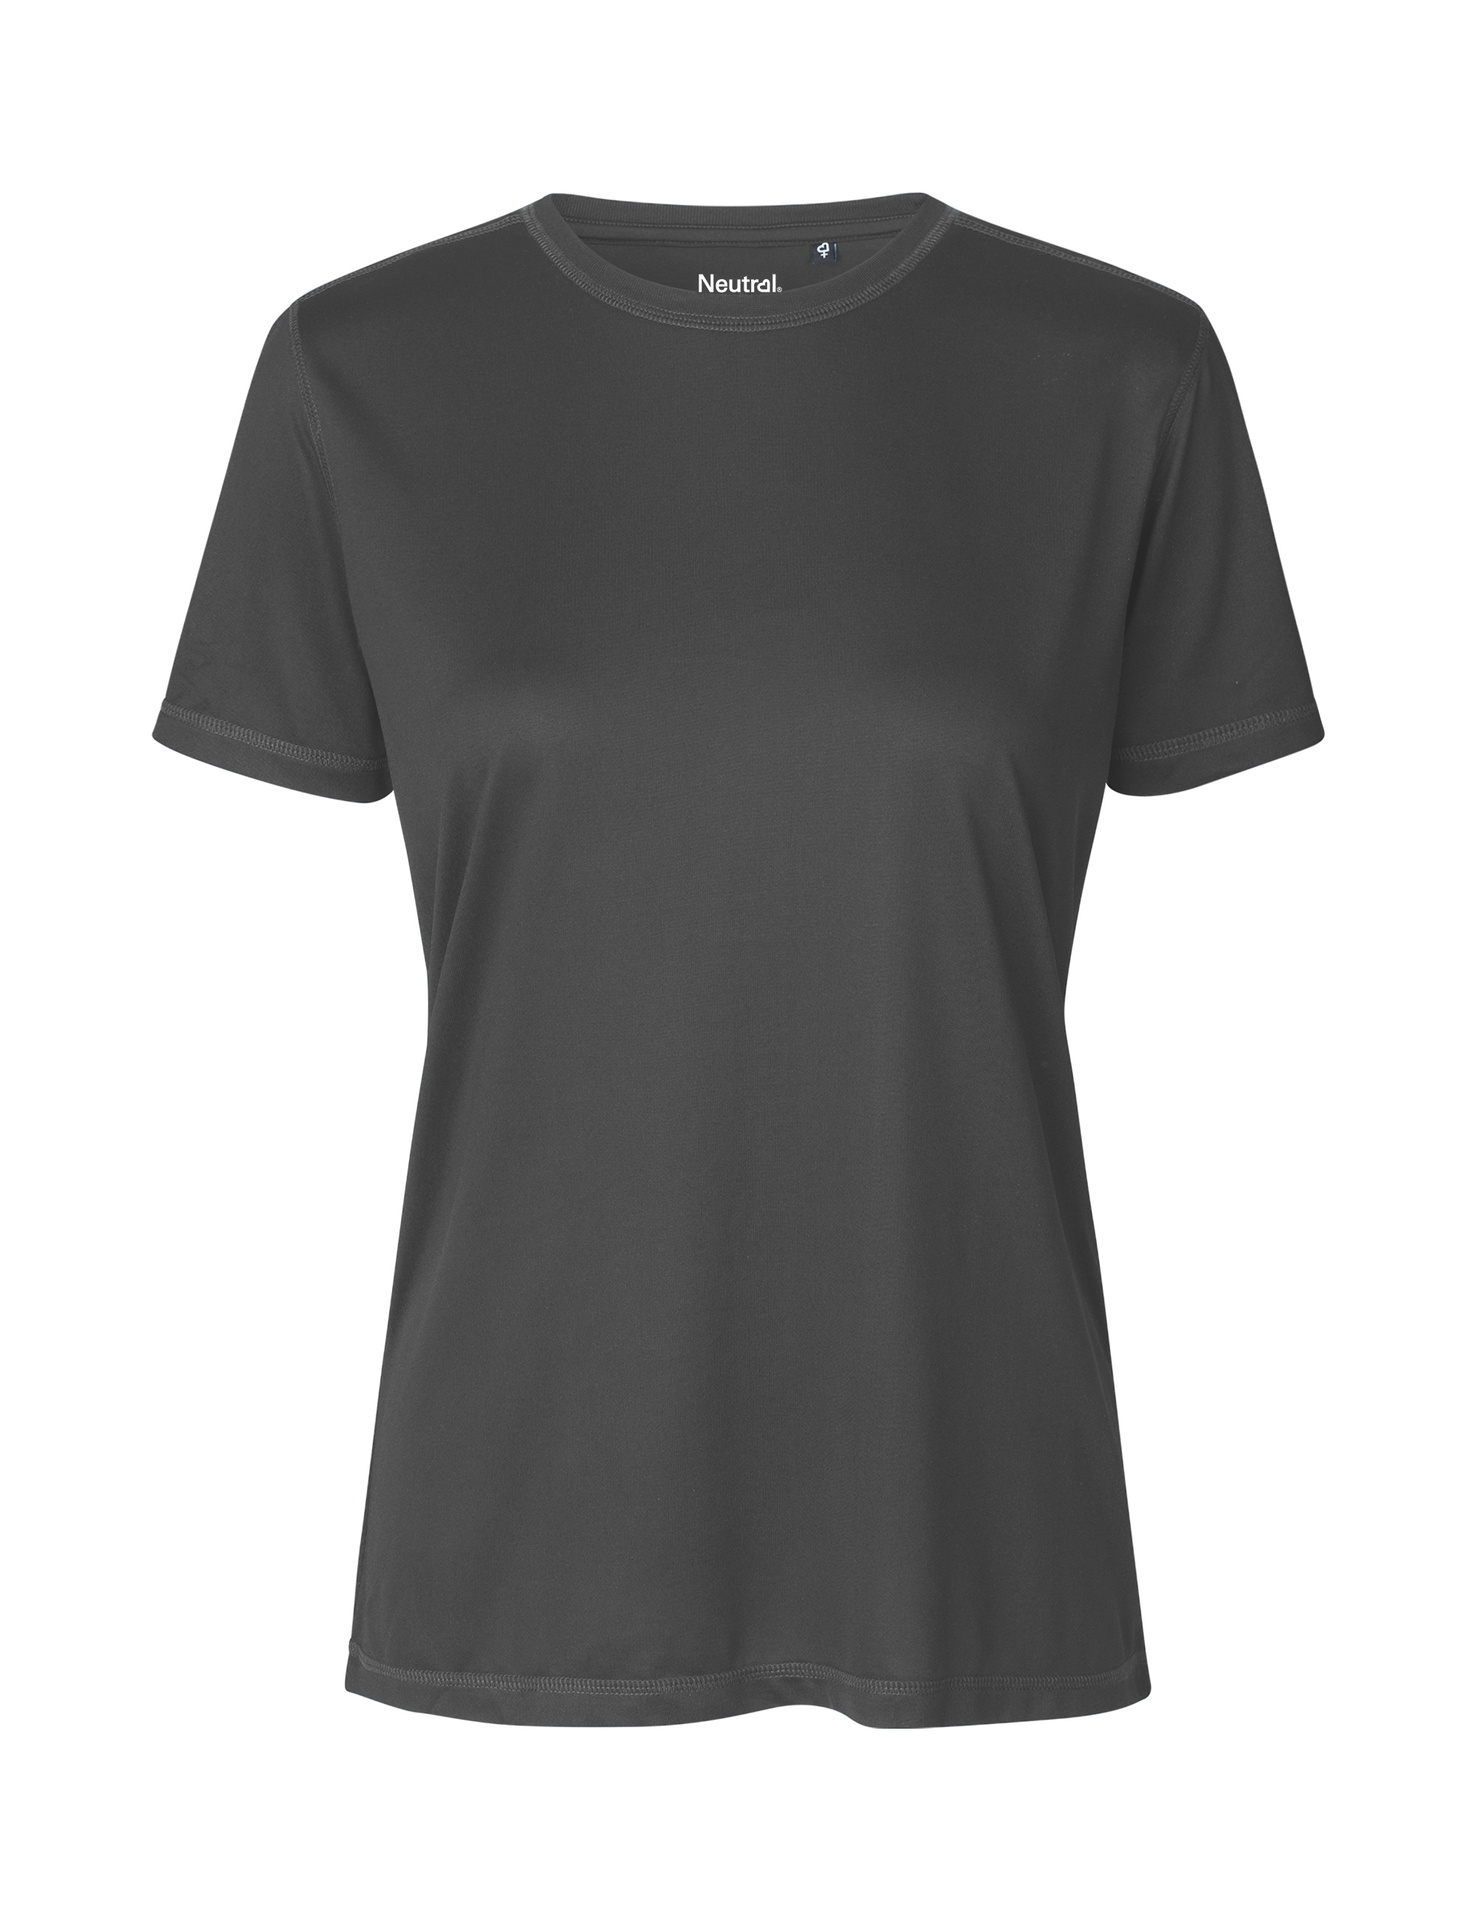 [PR/05217] Ladies Recycled Performance T-Shirt (Charcoal 06, S)